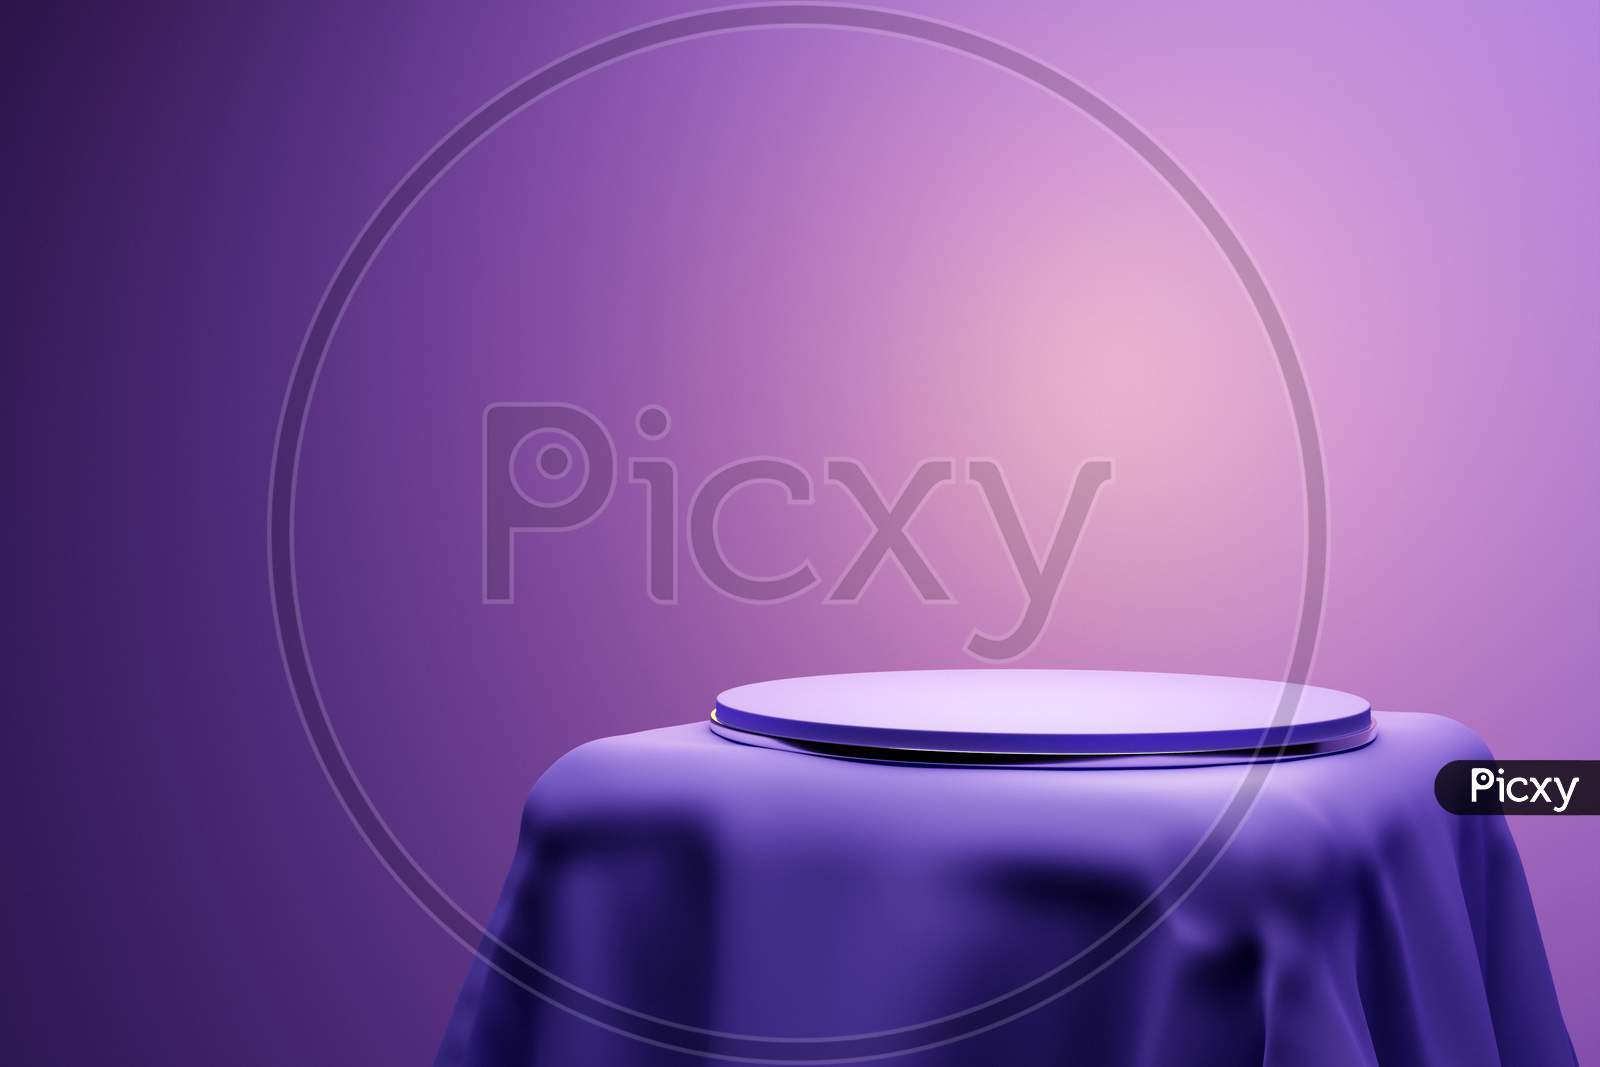 3D Illustration Of A Scene From A Circle On A Pedestal Under A Purple  Cloth  On A Monocrome Background. A Close-Up Of A White Round  Pedestal.